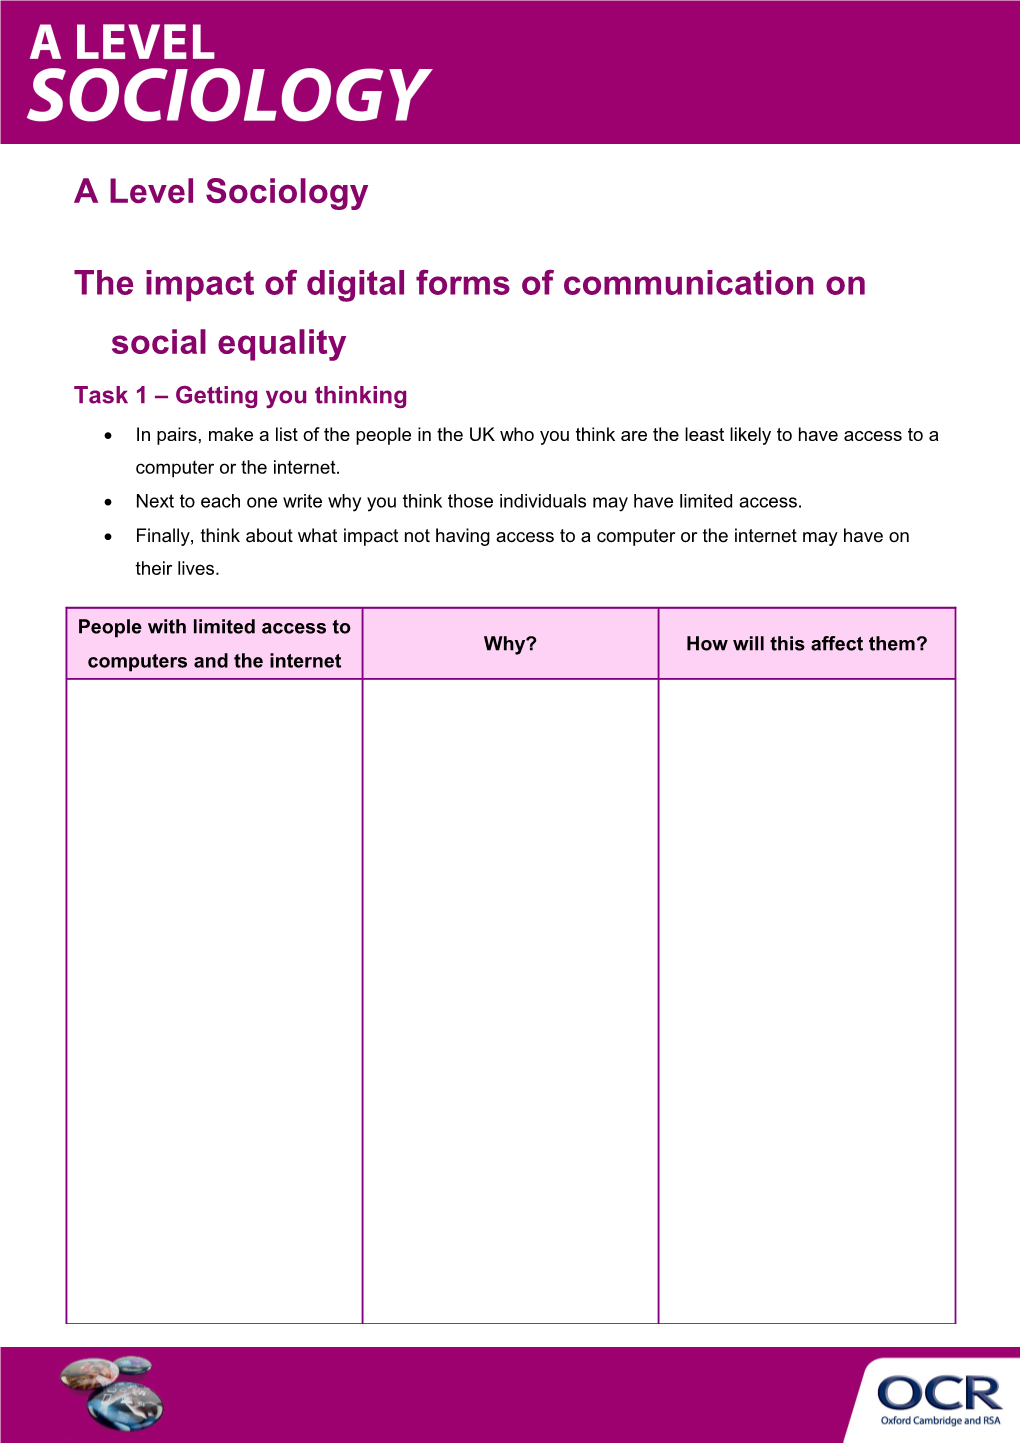 OCR a Level Sociology Lesson Element Learner Activity Sheet, the Impact of Digital Forms